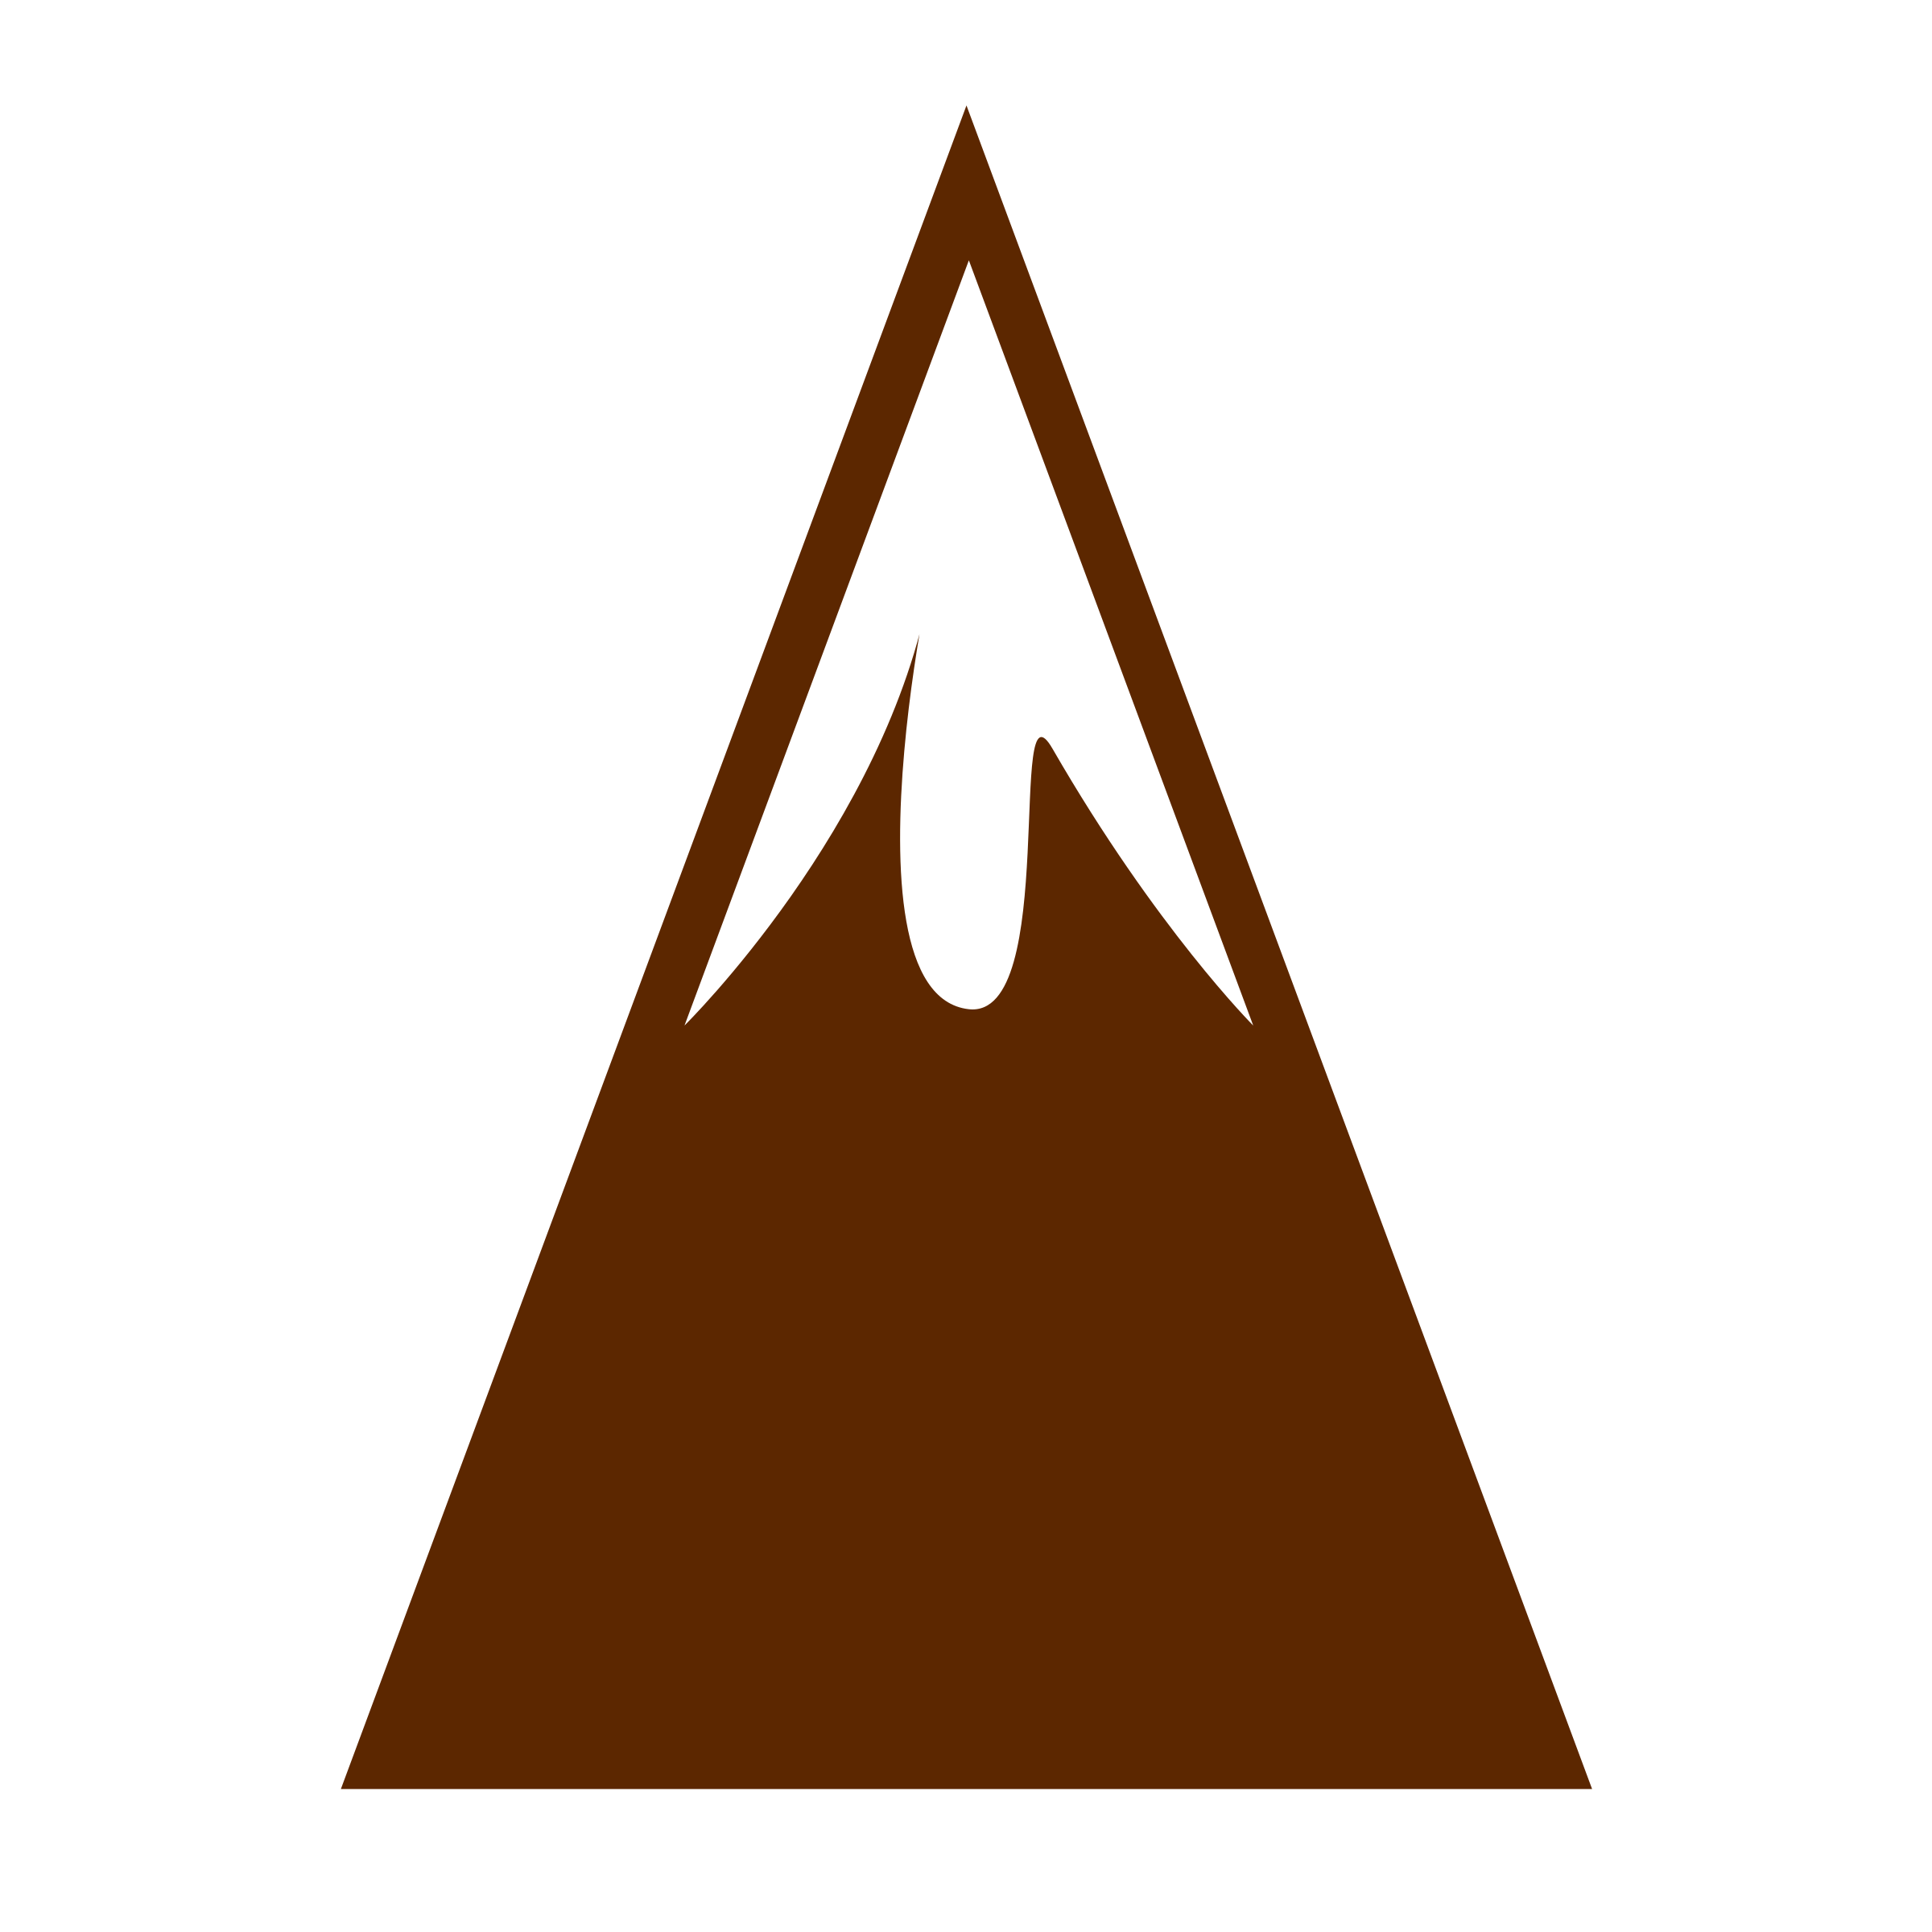 Big mountain clipart - Clipground